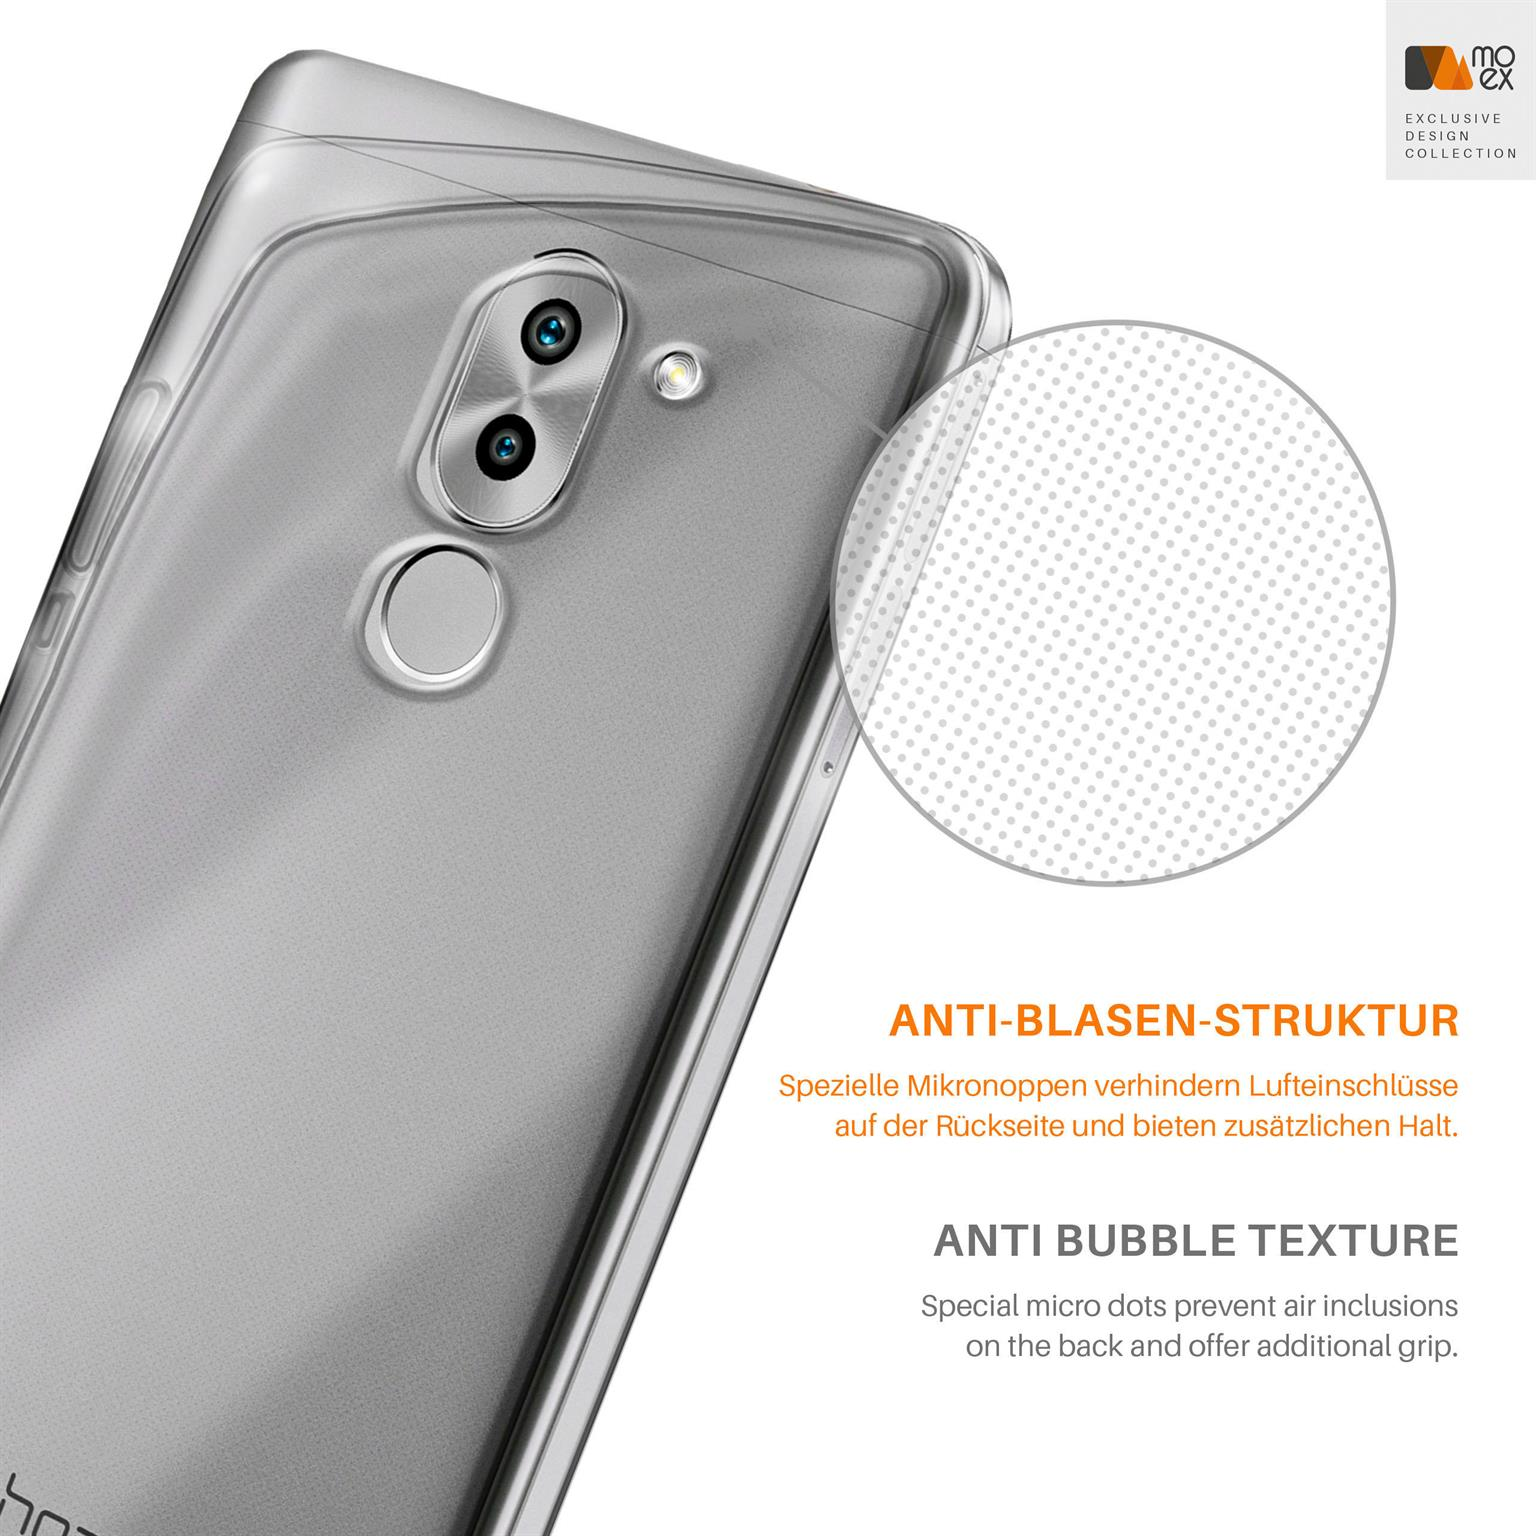 MOEX Aero Case, Backcover, 9 Mate Crystal-Clear Lite, Huawei